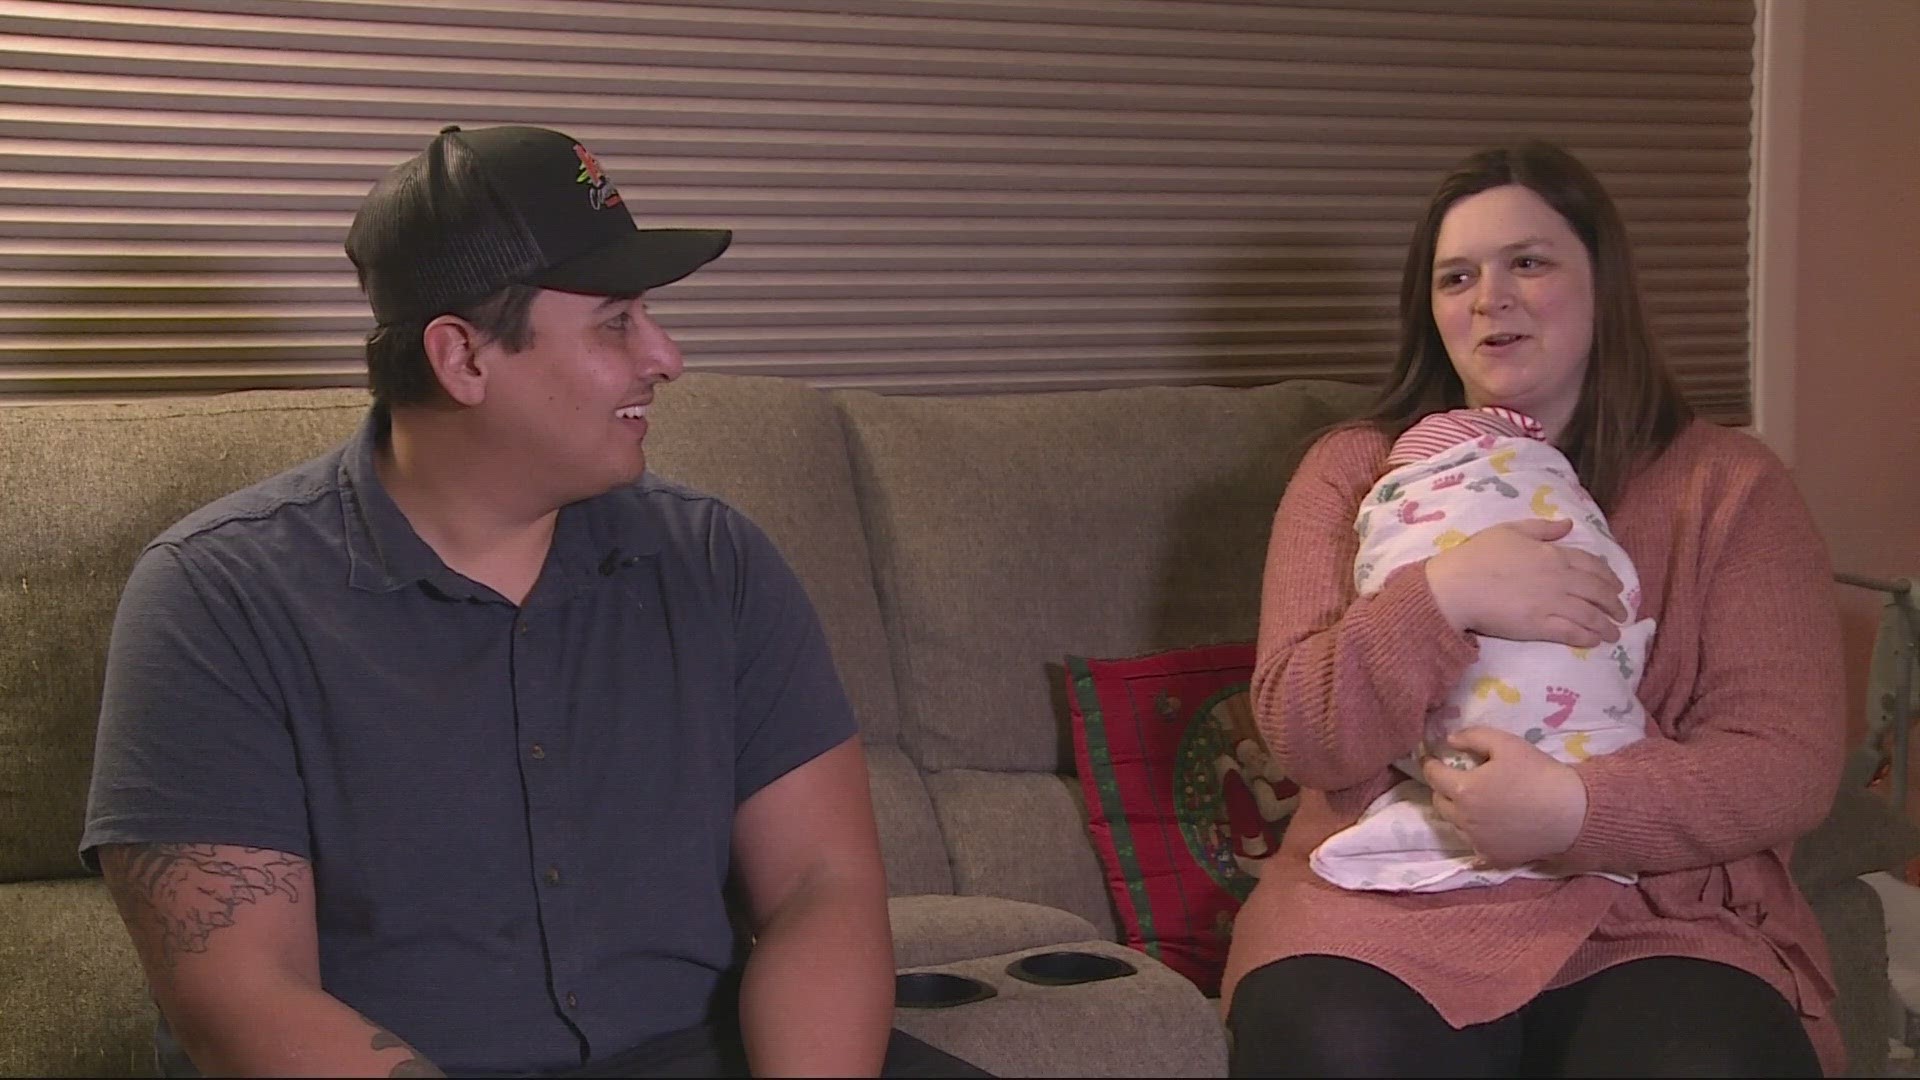 The first-time parents welcomed a baby boy at Legacy Salmon Creek where their Hyundai Elantra was stolen.